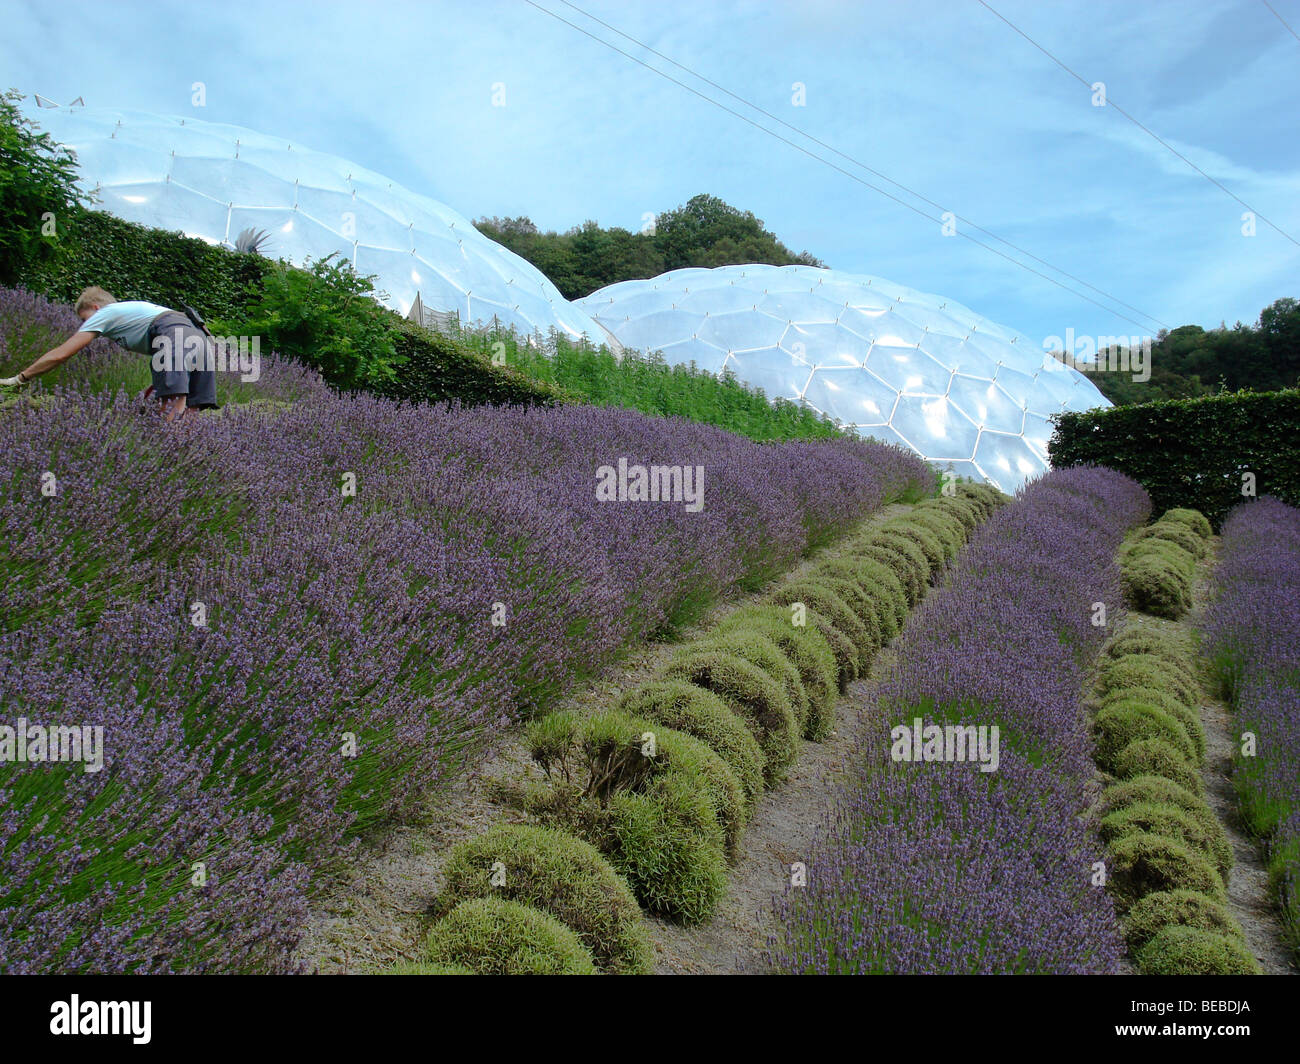 A worker picks lavender for the Eden Project shop, the world famous biomes (Bio Domes) are in the background. Stock Photo